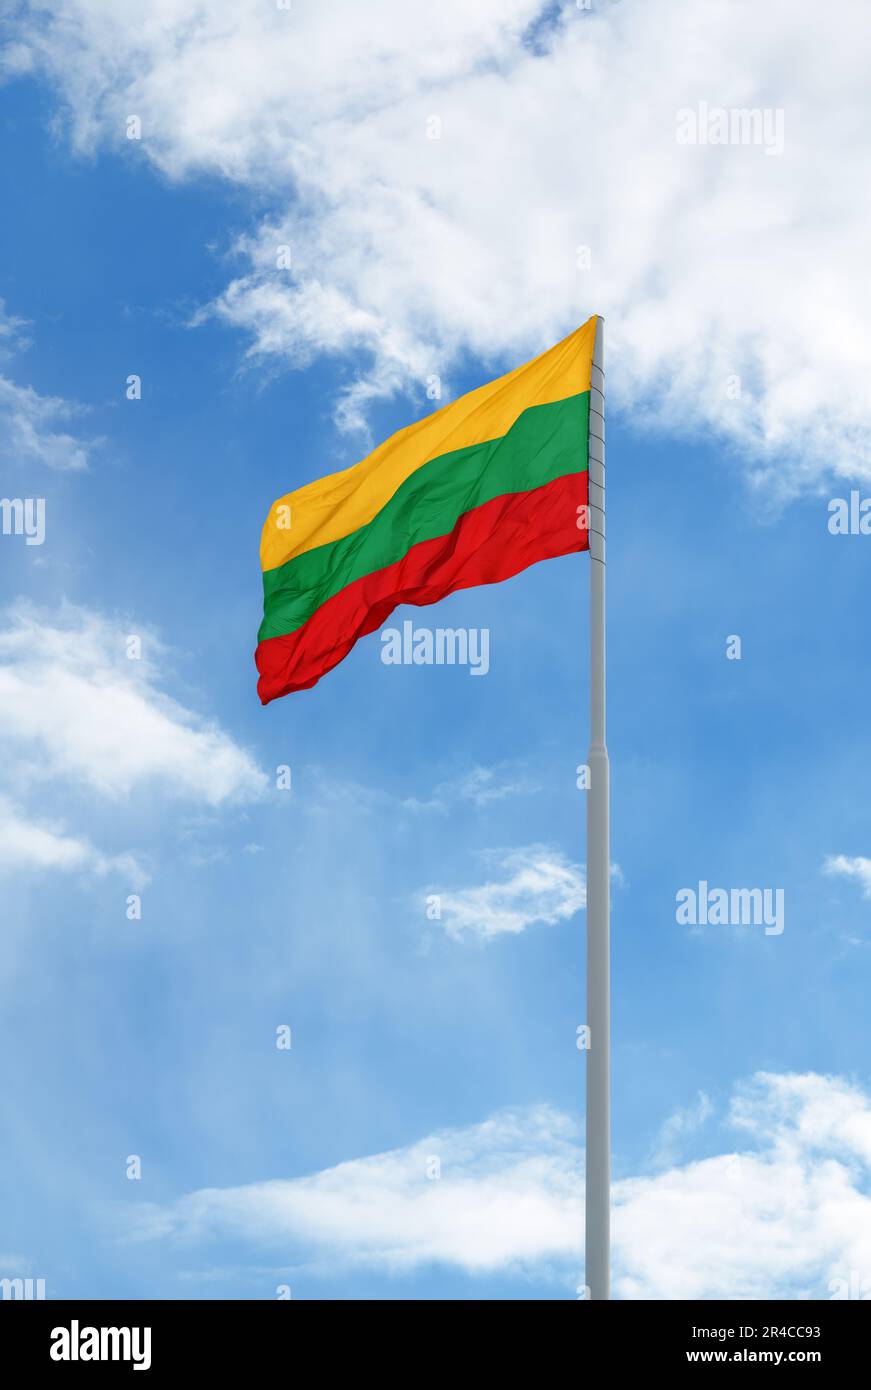 Flag of Lithuania is waving in front of blue sky and clouds Stock Photo